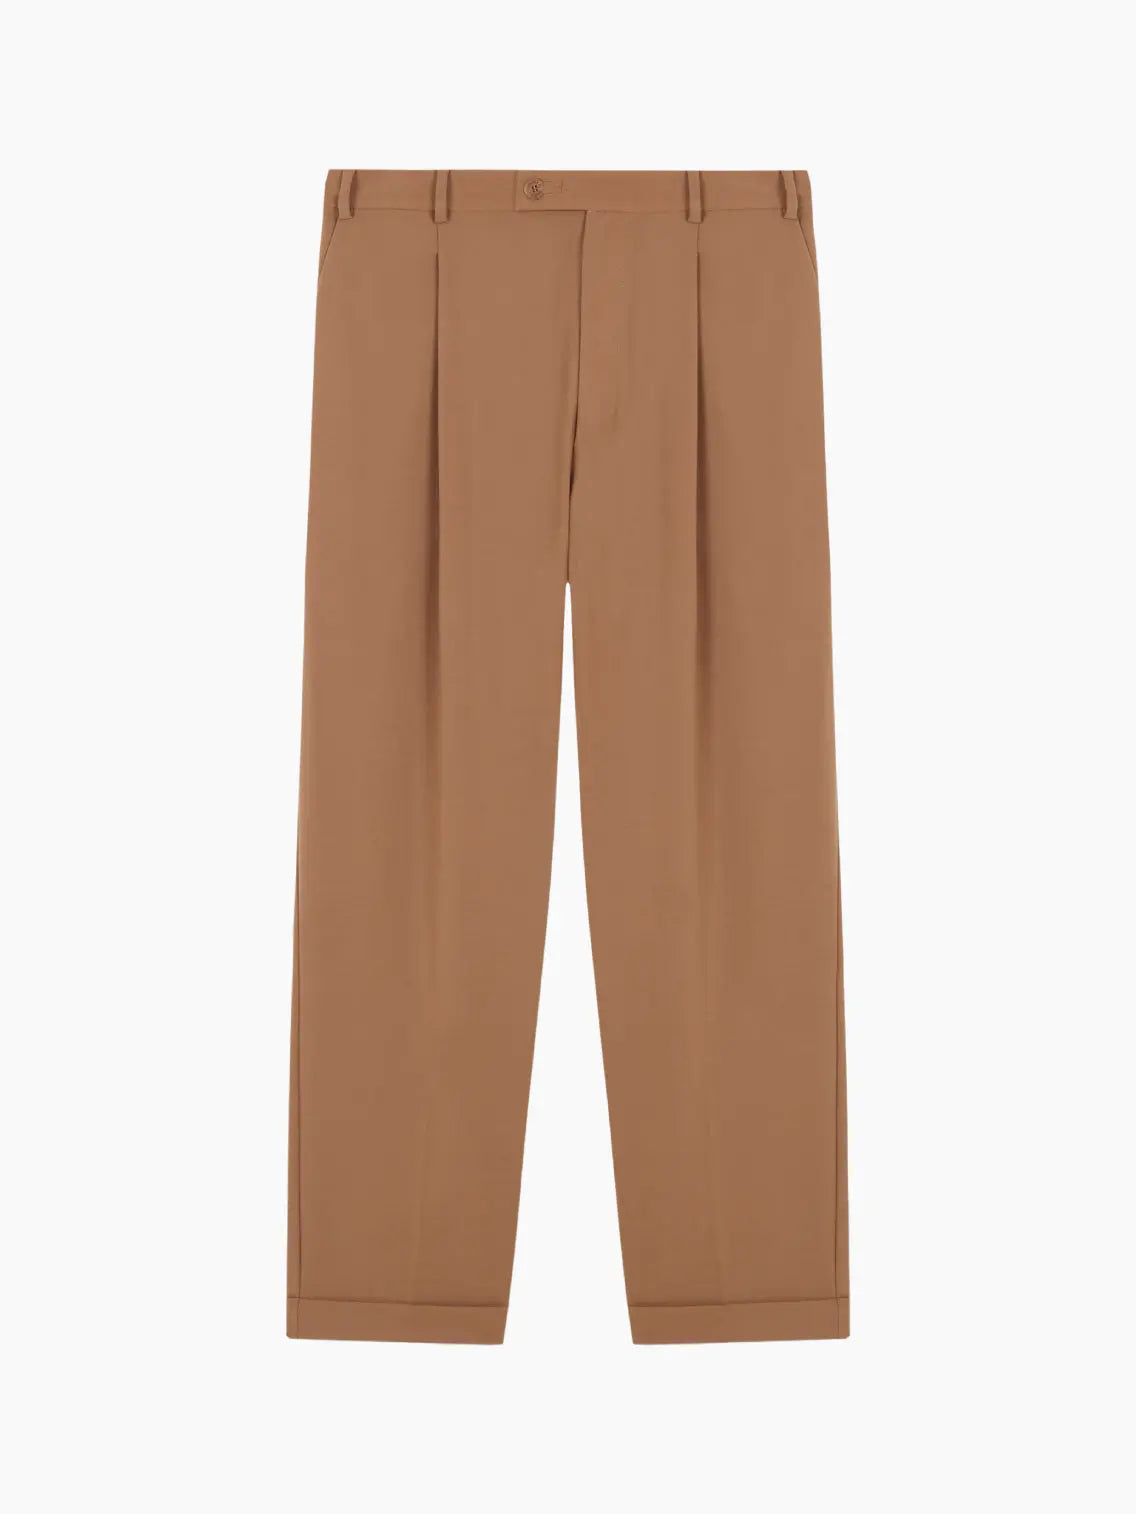 A pair of Tailoring Masculine Pants Camel by Cordera with a button closure at the waist. The pants have a straight-leg design and belt loops. They are laid flat, facing upward, against a plain white background, showcasing the timeless style available exclusively at Bassalstore in Barcelona.